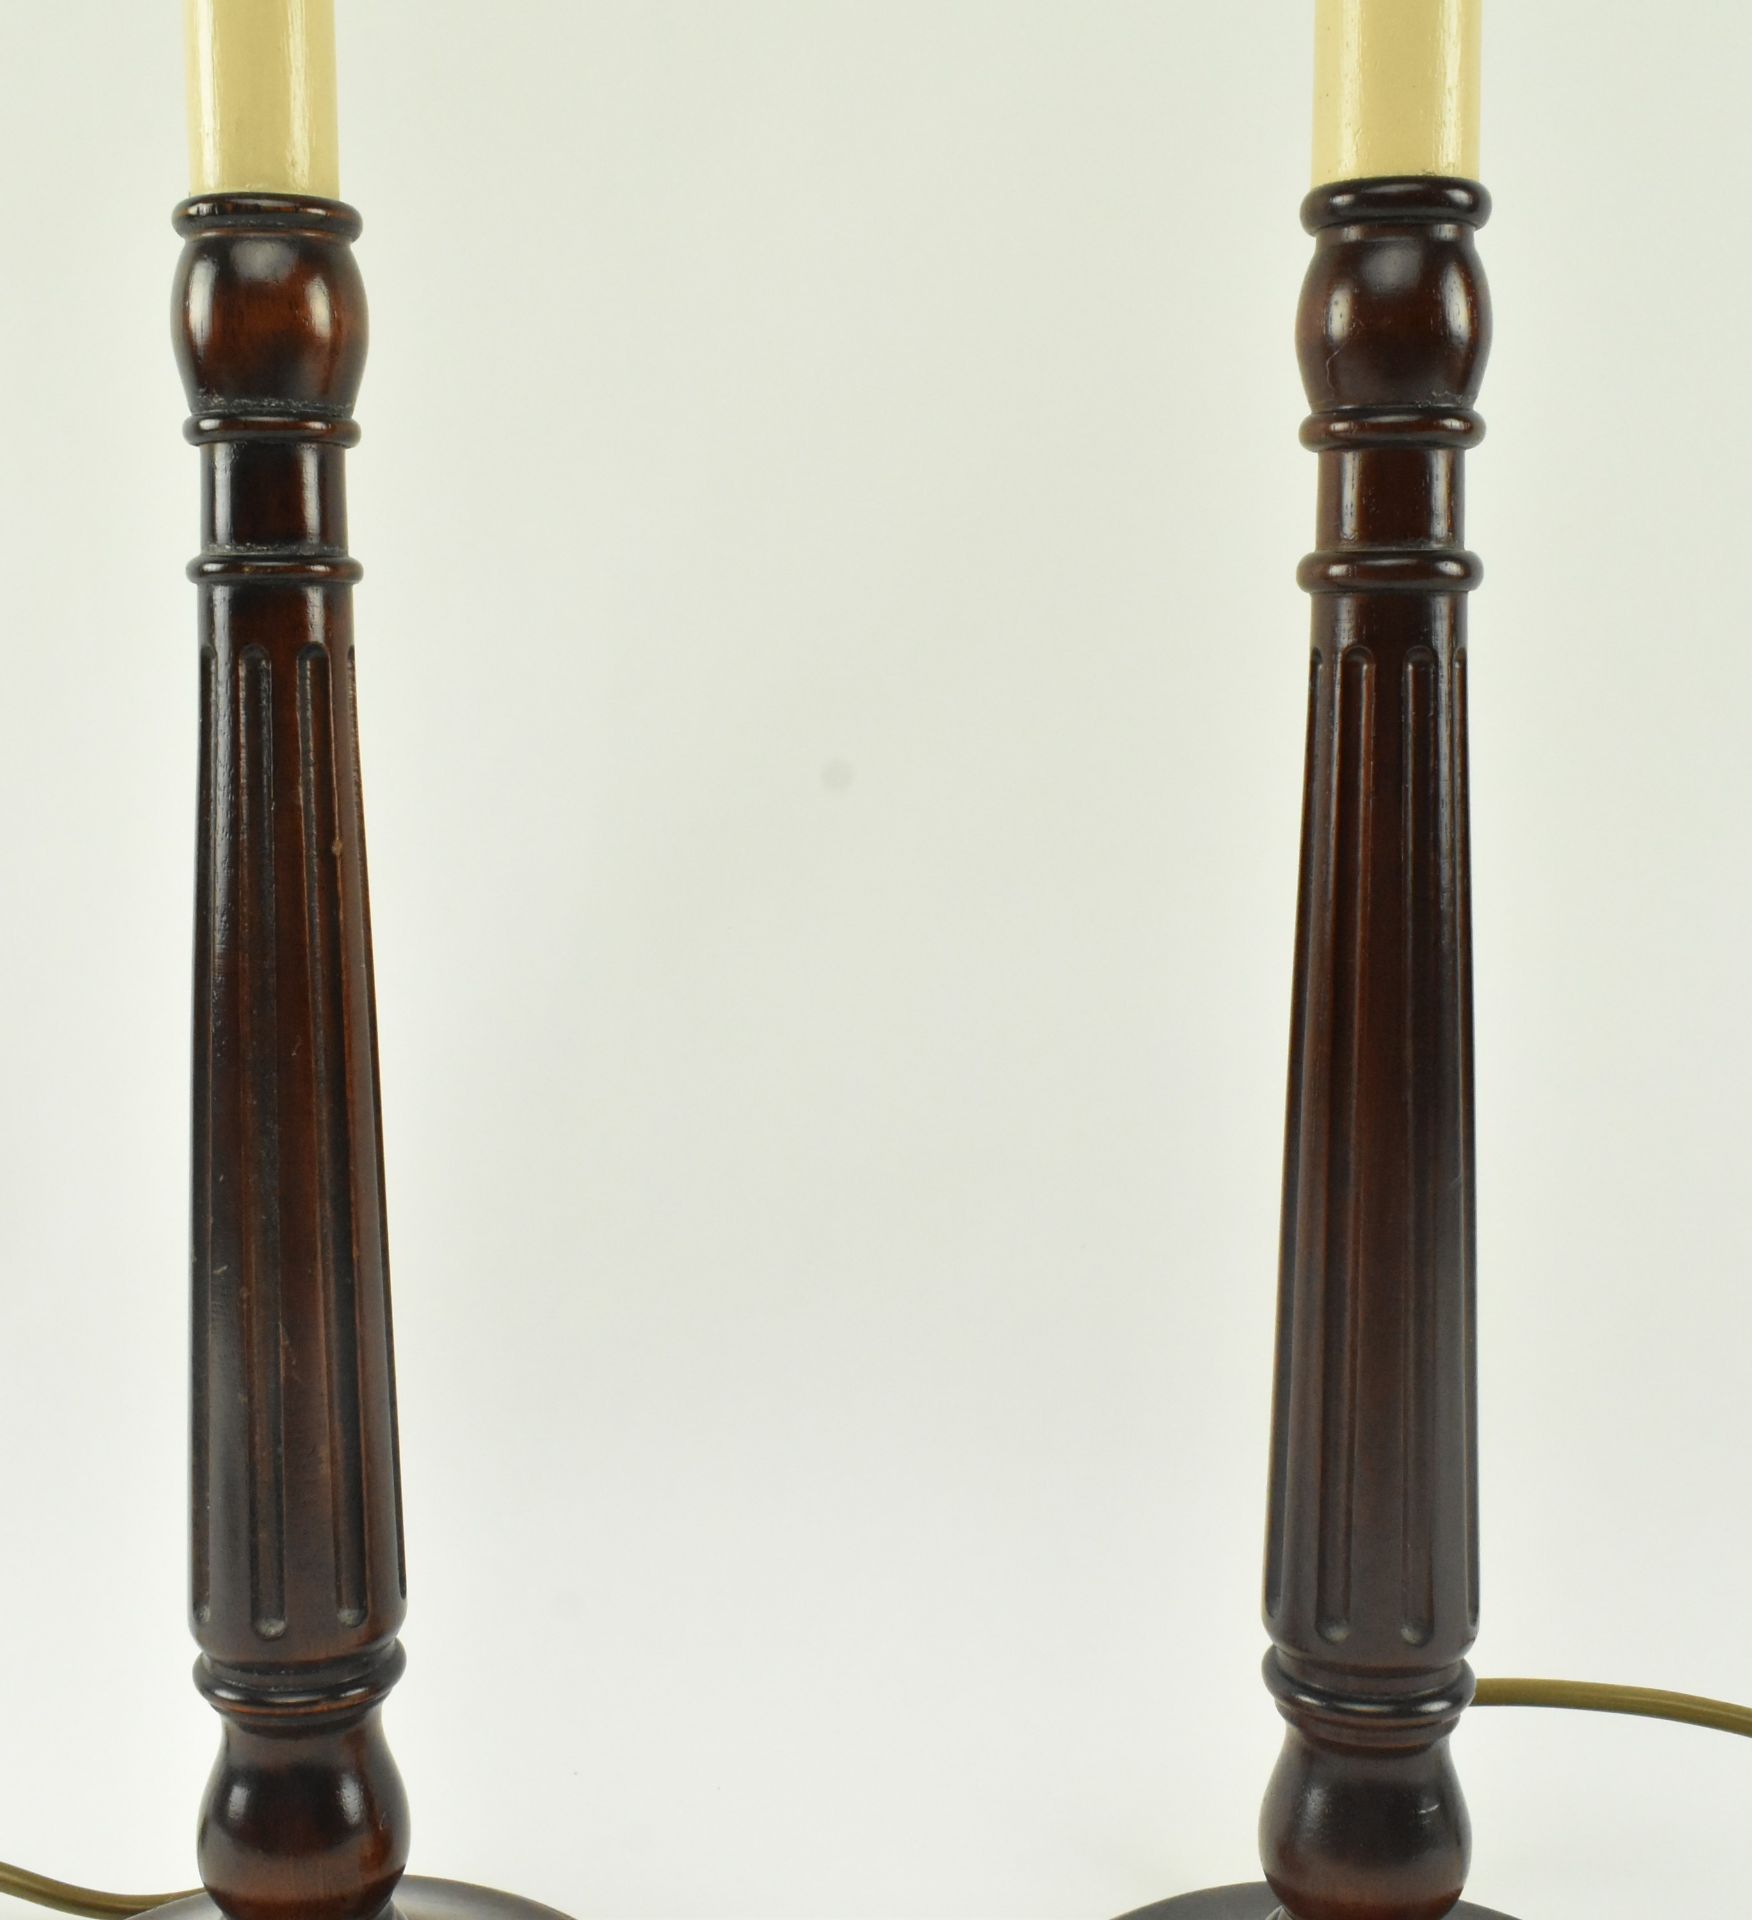 PAIR OF CONTEMPORARY NEO-CLASSICAL STYLE COLUMN DESK LAMPS - Image 3 of 5